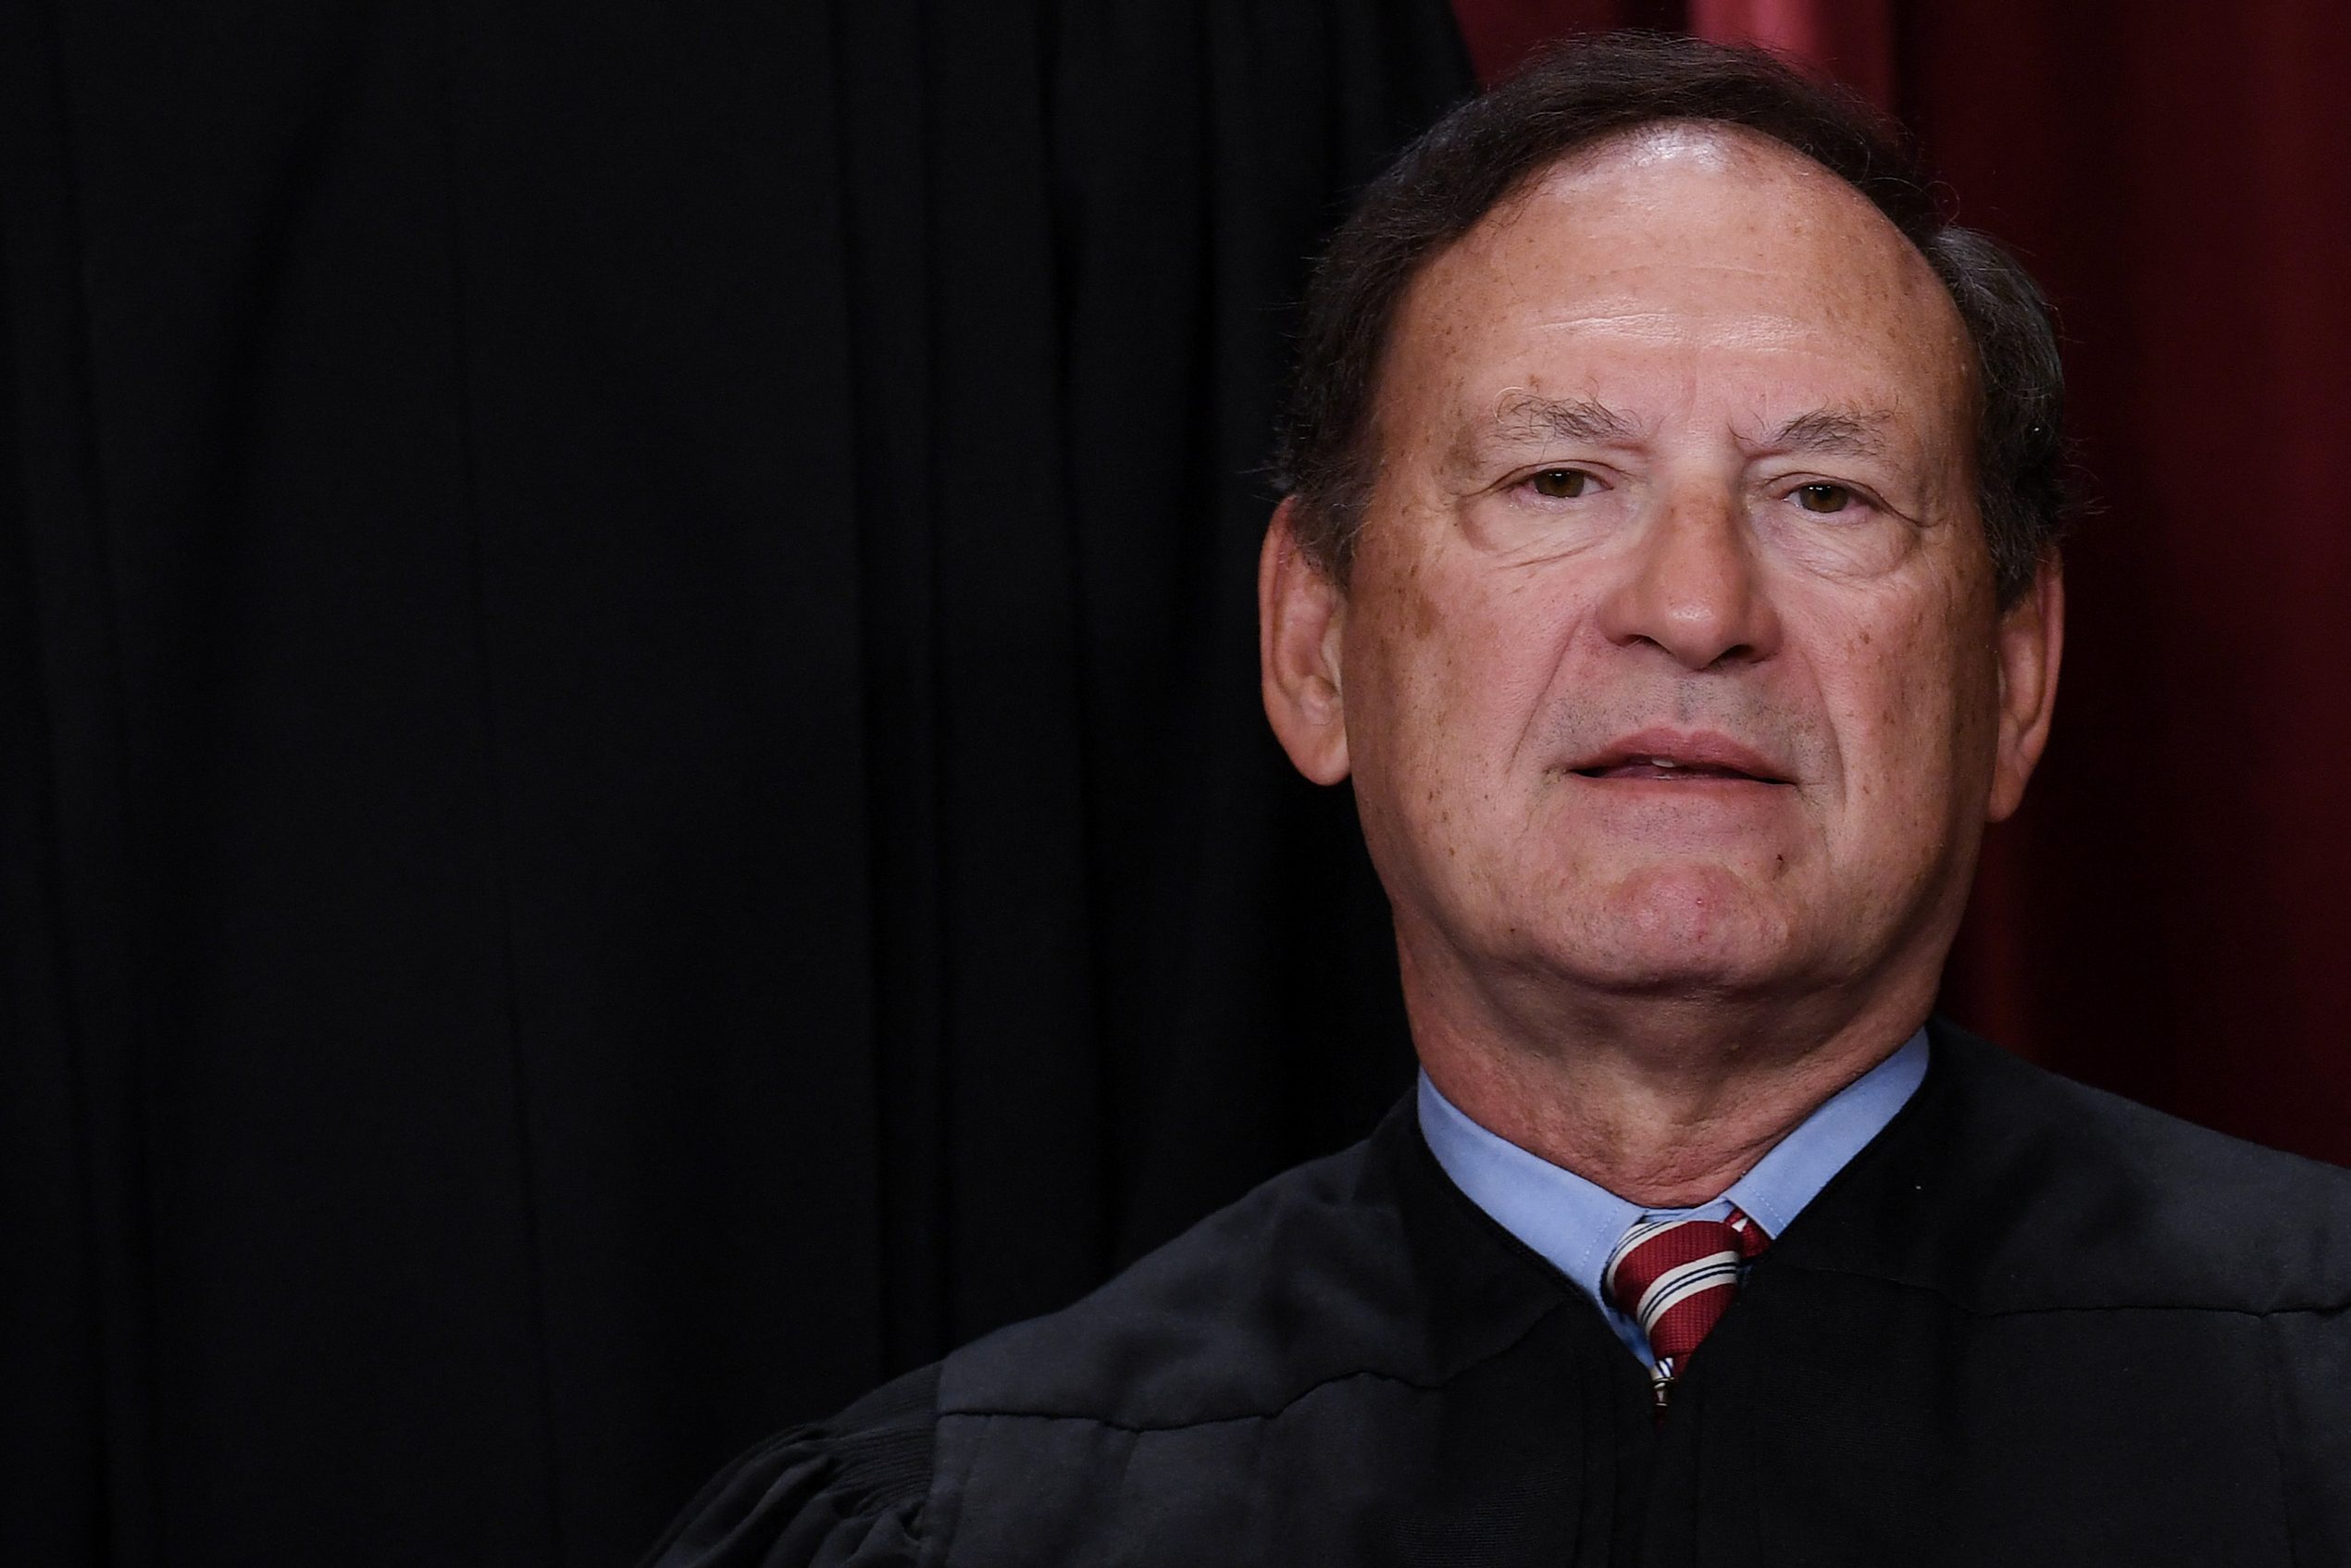 justice-samuel-alito-comments-abortion-ruling-dissent-1142238